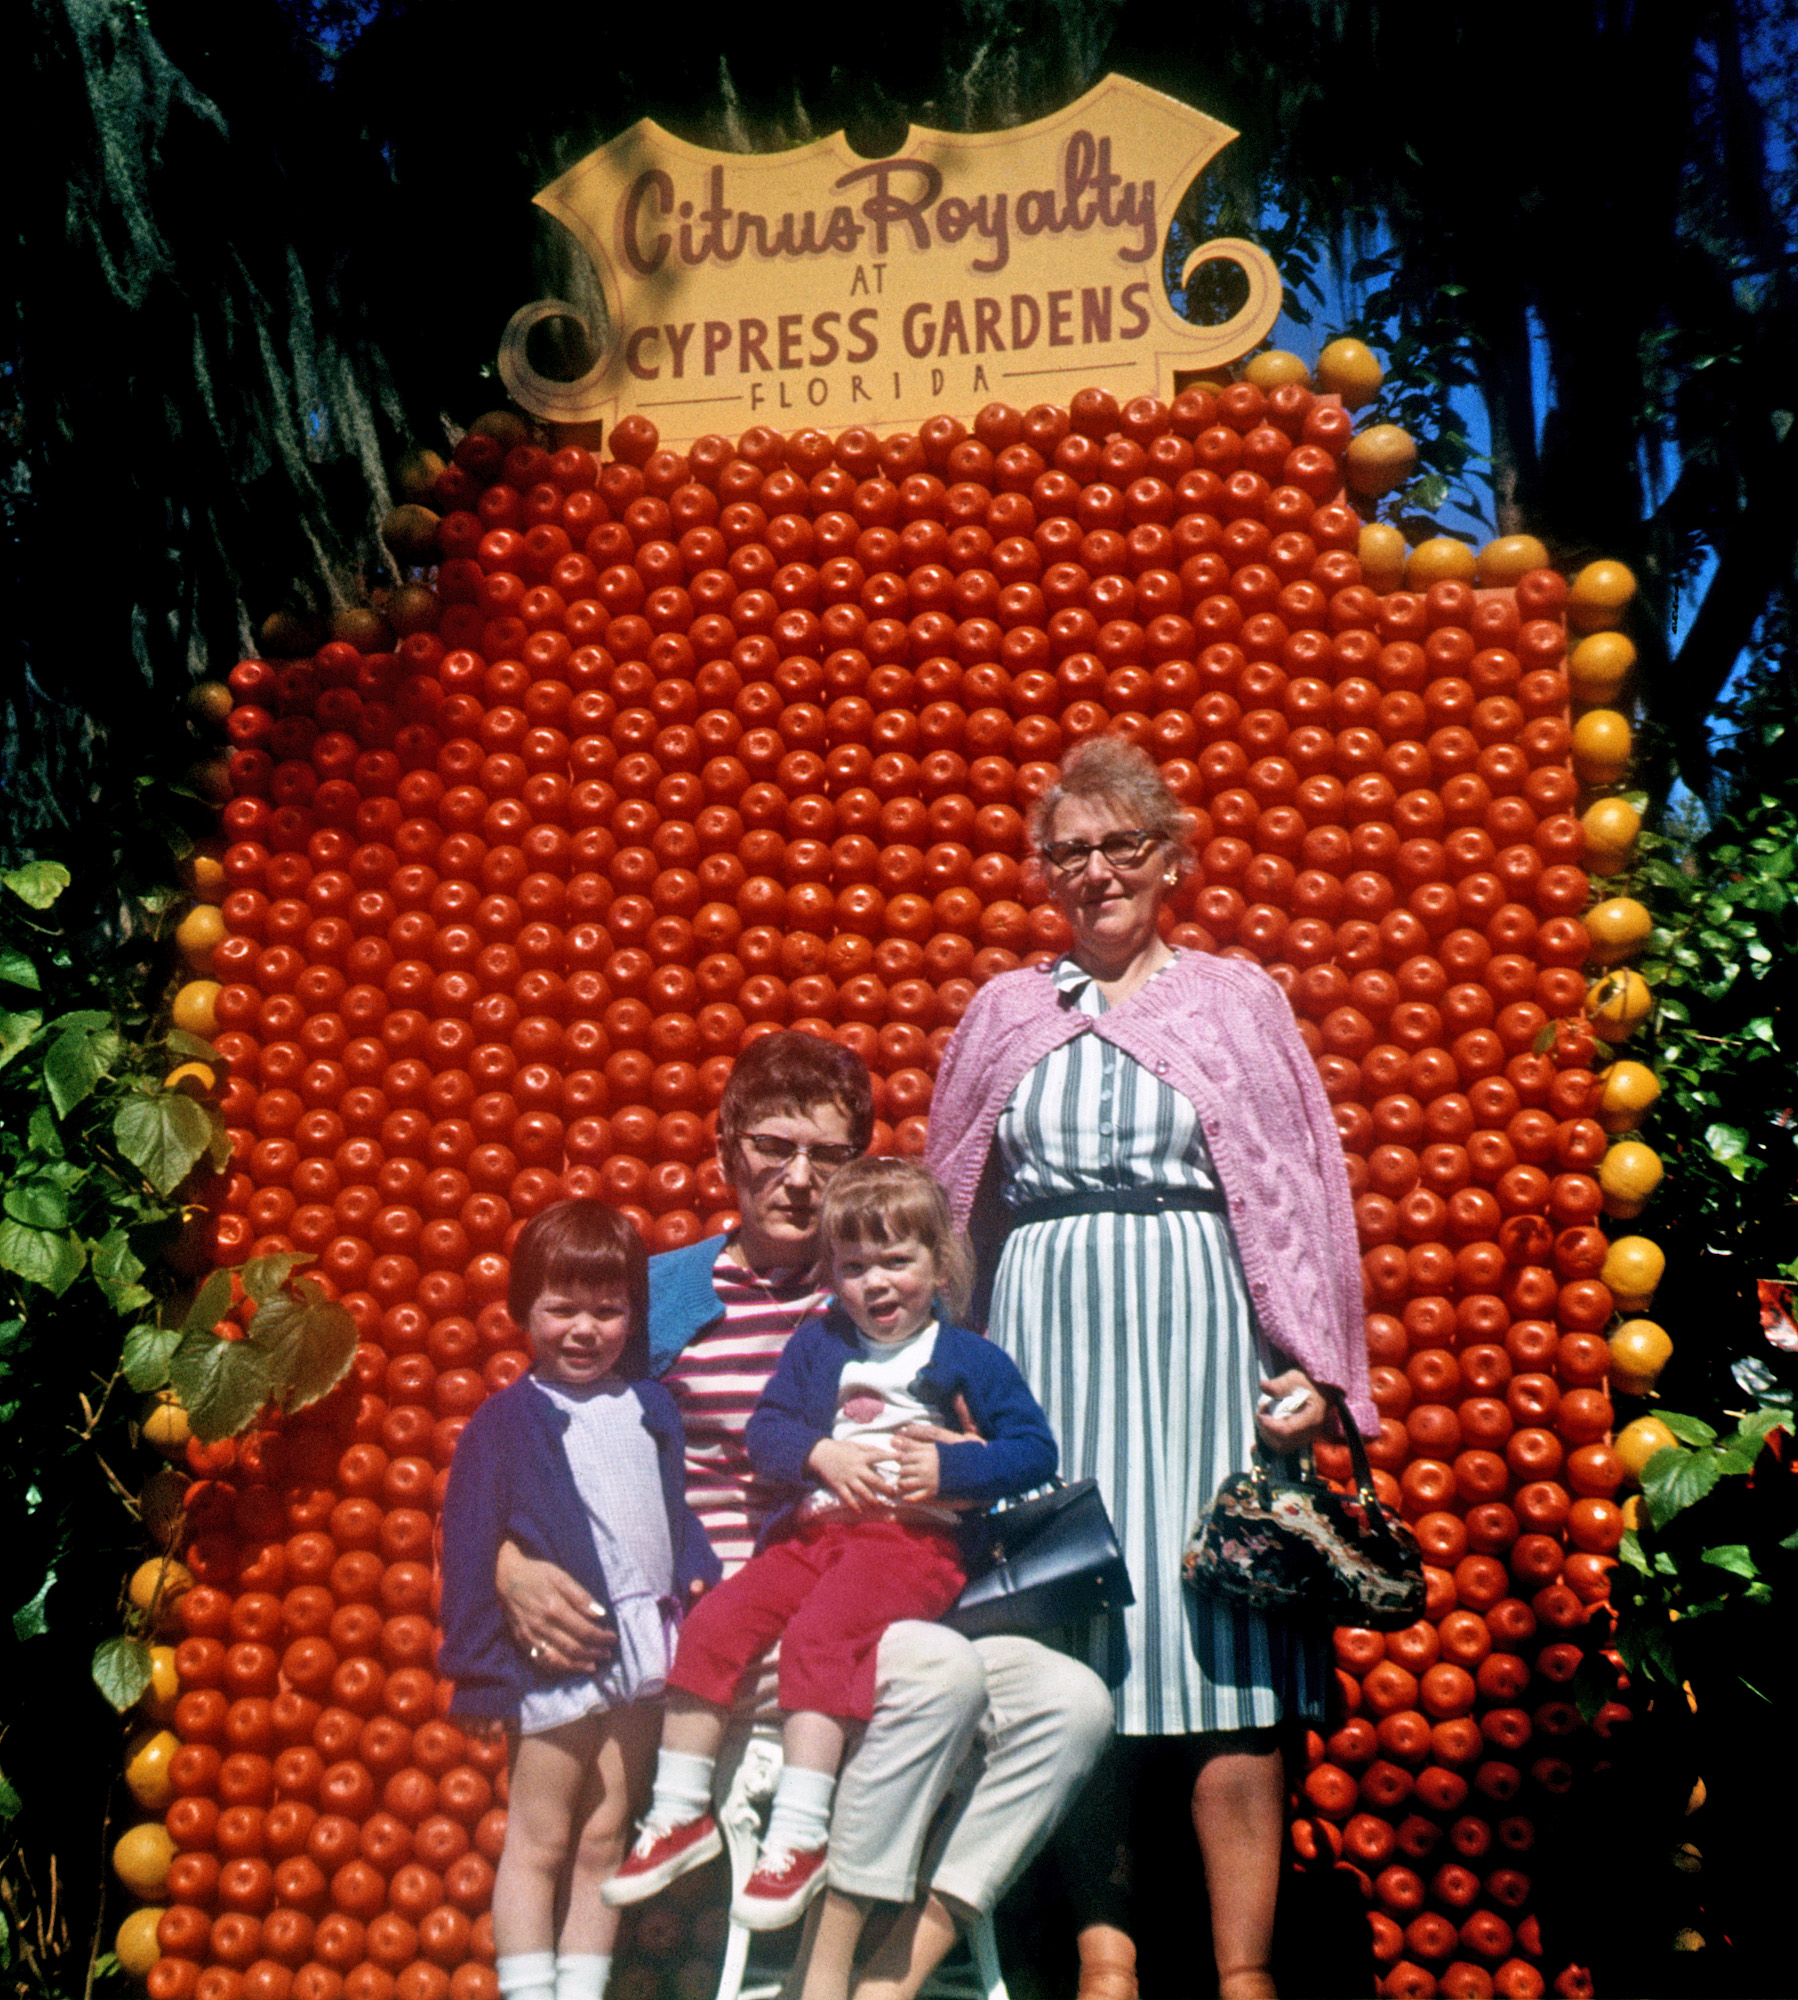 From a friend's collection of her family's slides I'm scanning for her. She's the little girl on the right, along with her older sister (previously seen here on Shorpy), and their aunt and grandmother. Shot on 126 Ektachrome. Obviously this family was big into fruit. View full size.